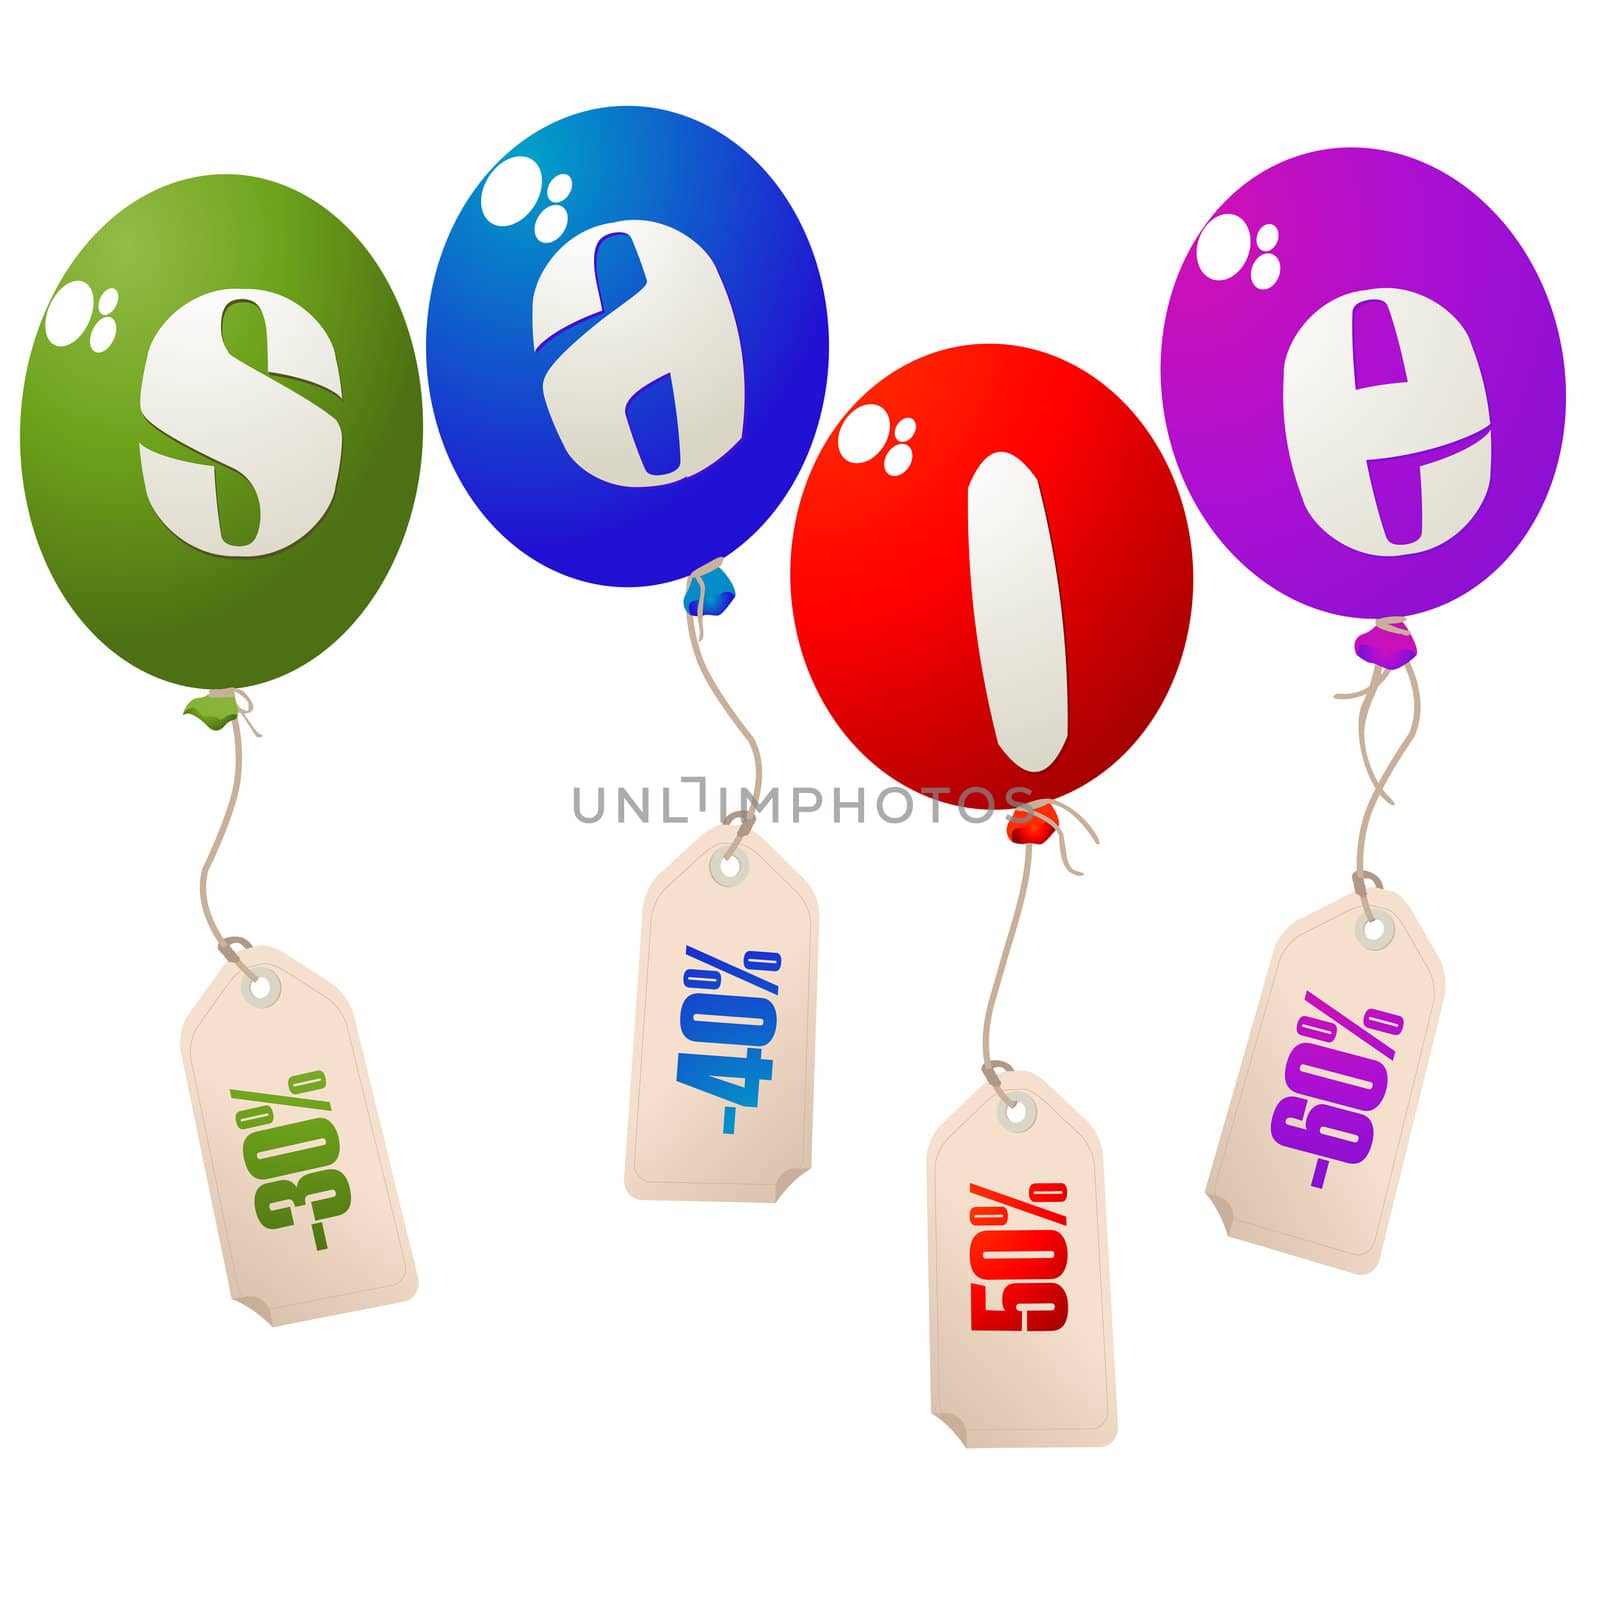 sale balloons concept by Lirch